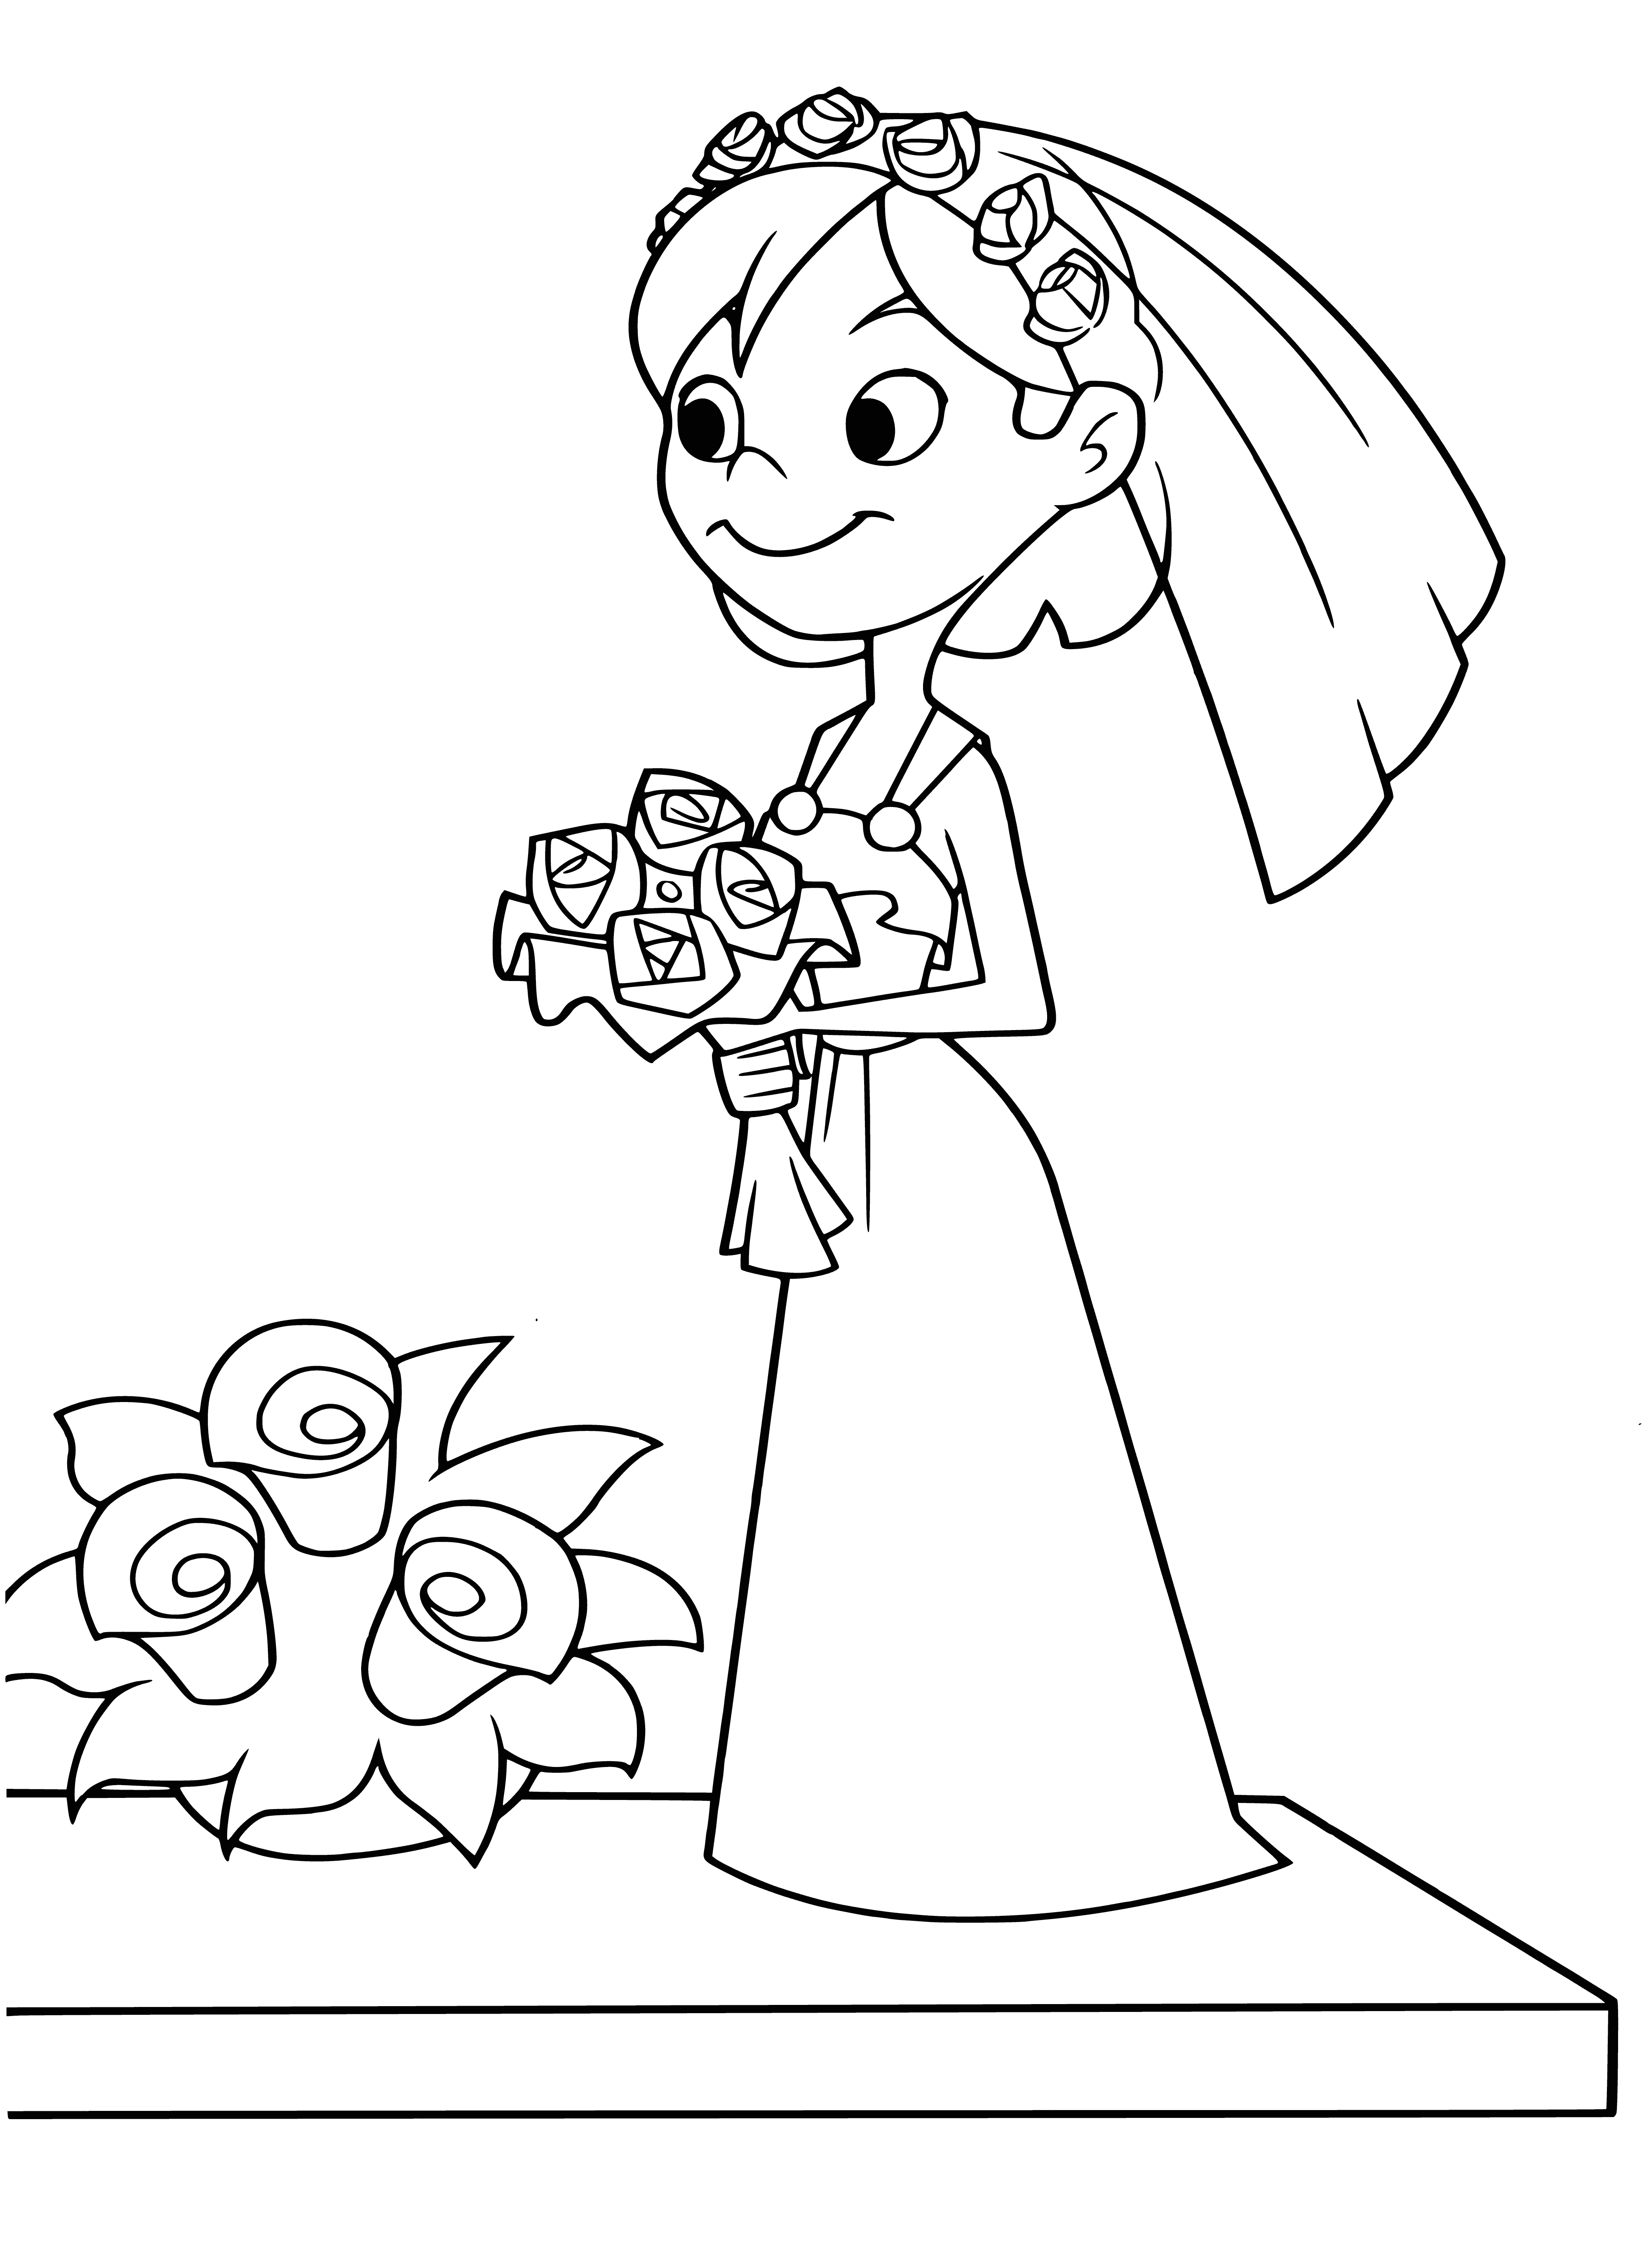 coloring page: She stands at the window, in a long white dress and bun, holding a bouquet of white flowers.